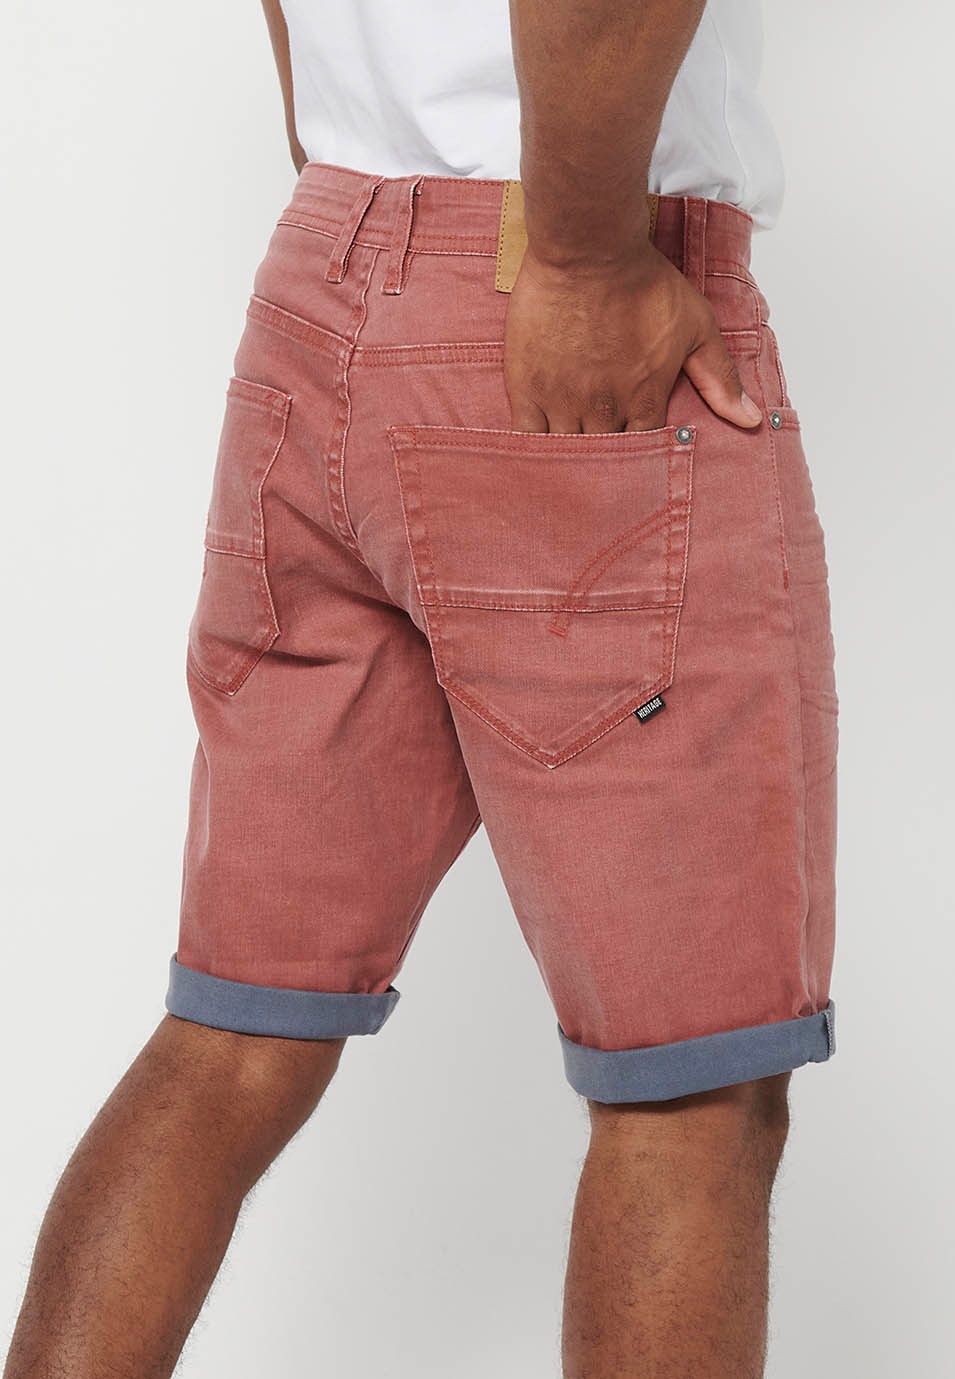 Denim Bermuda shorts with turn-up finish, front closure with zipper and button with five pockets, one pocket in Maroon Color for Men 1